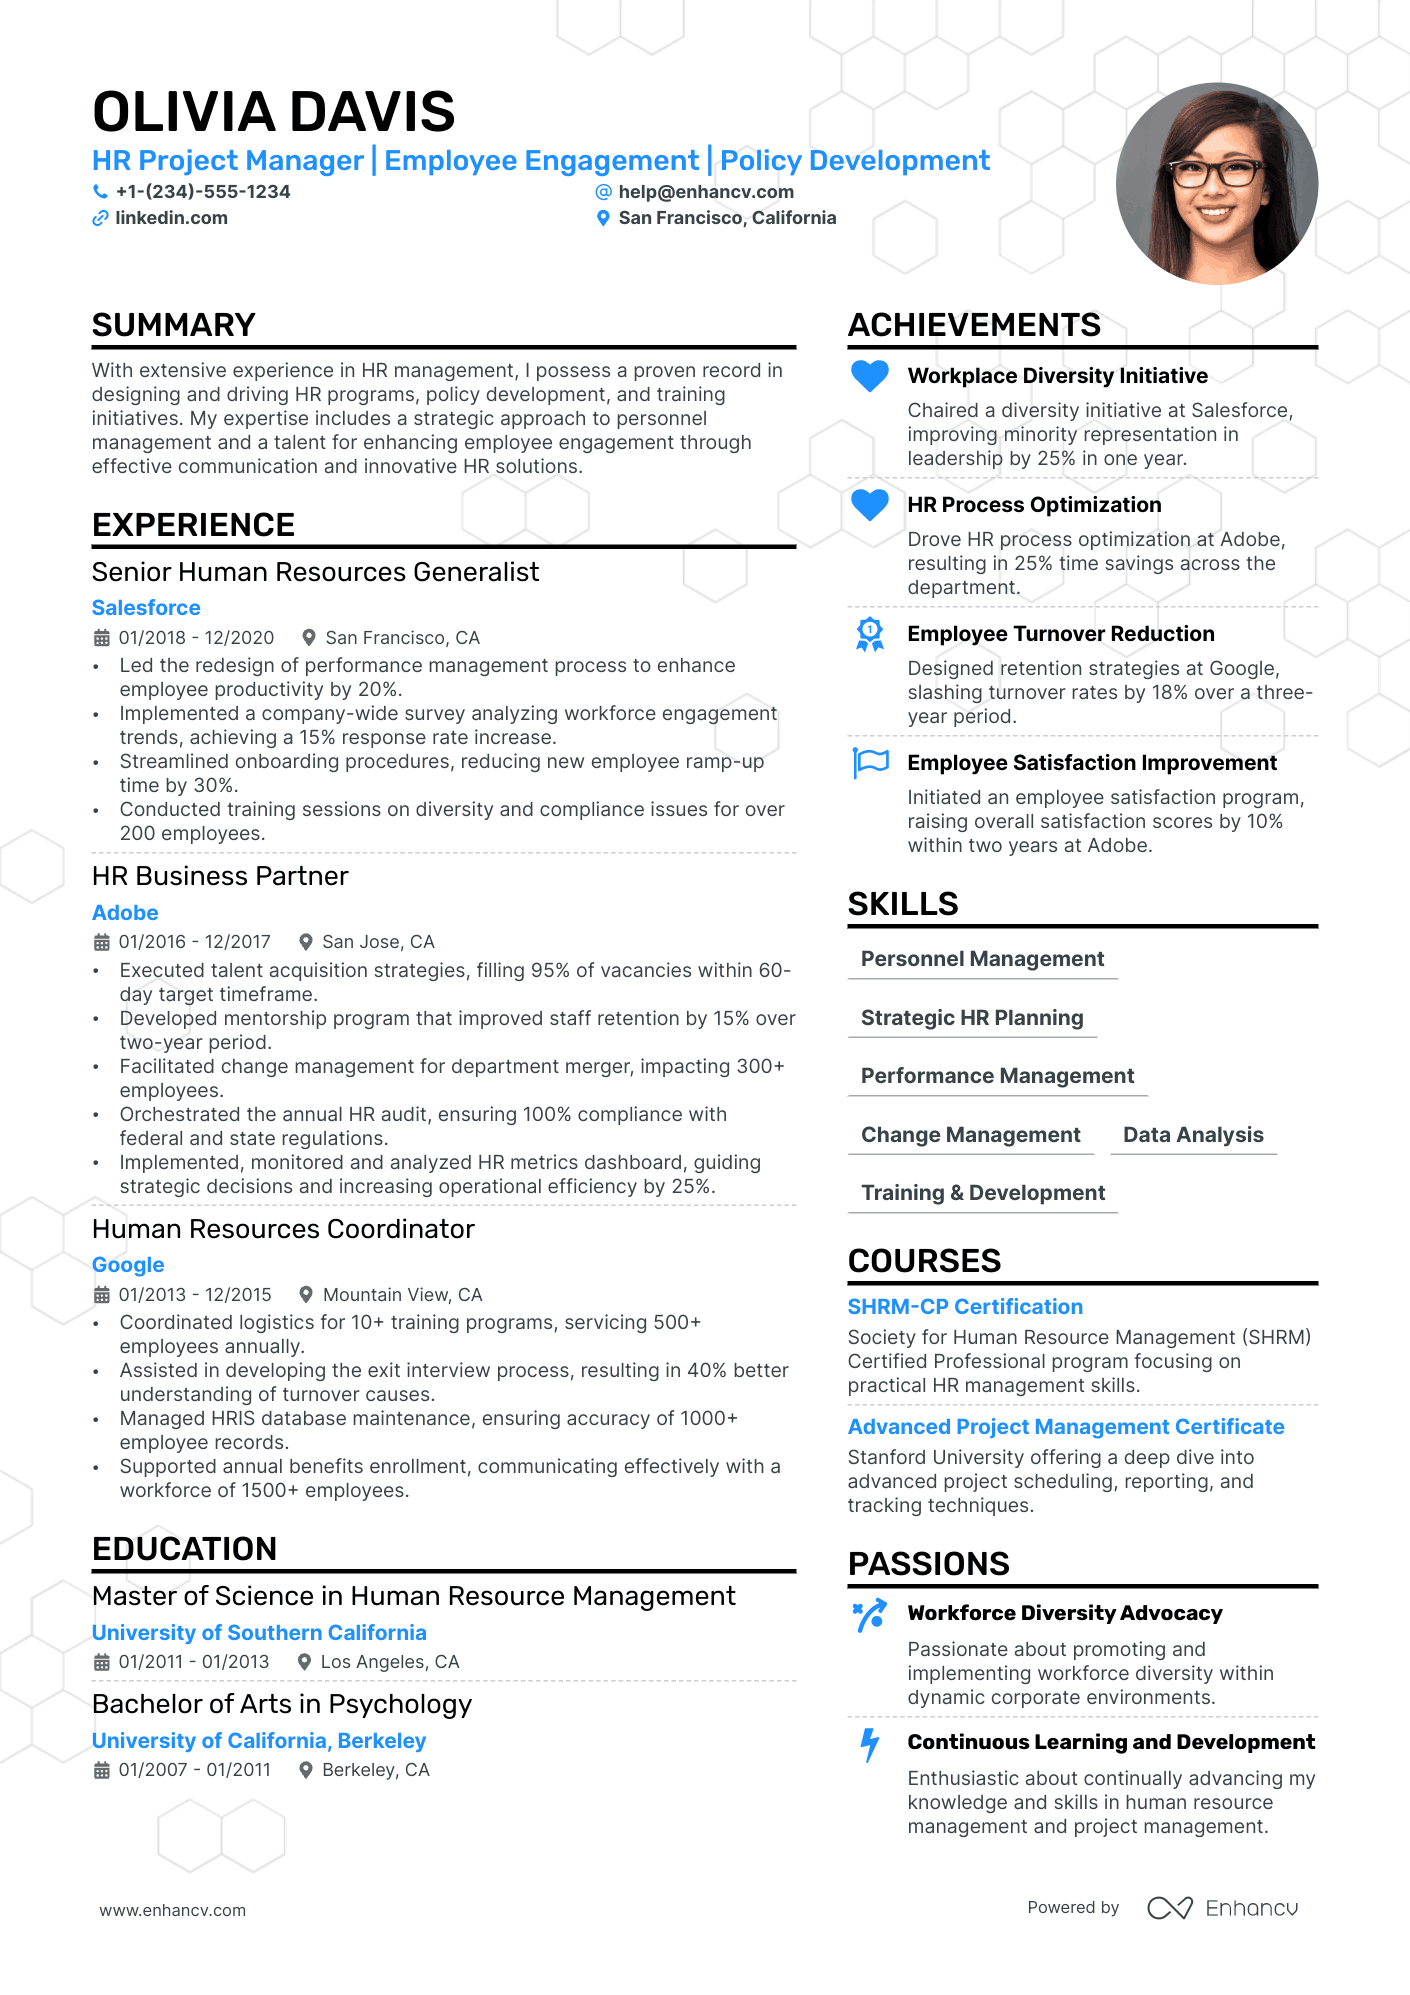 HR Project Manager resume example